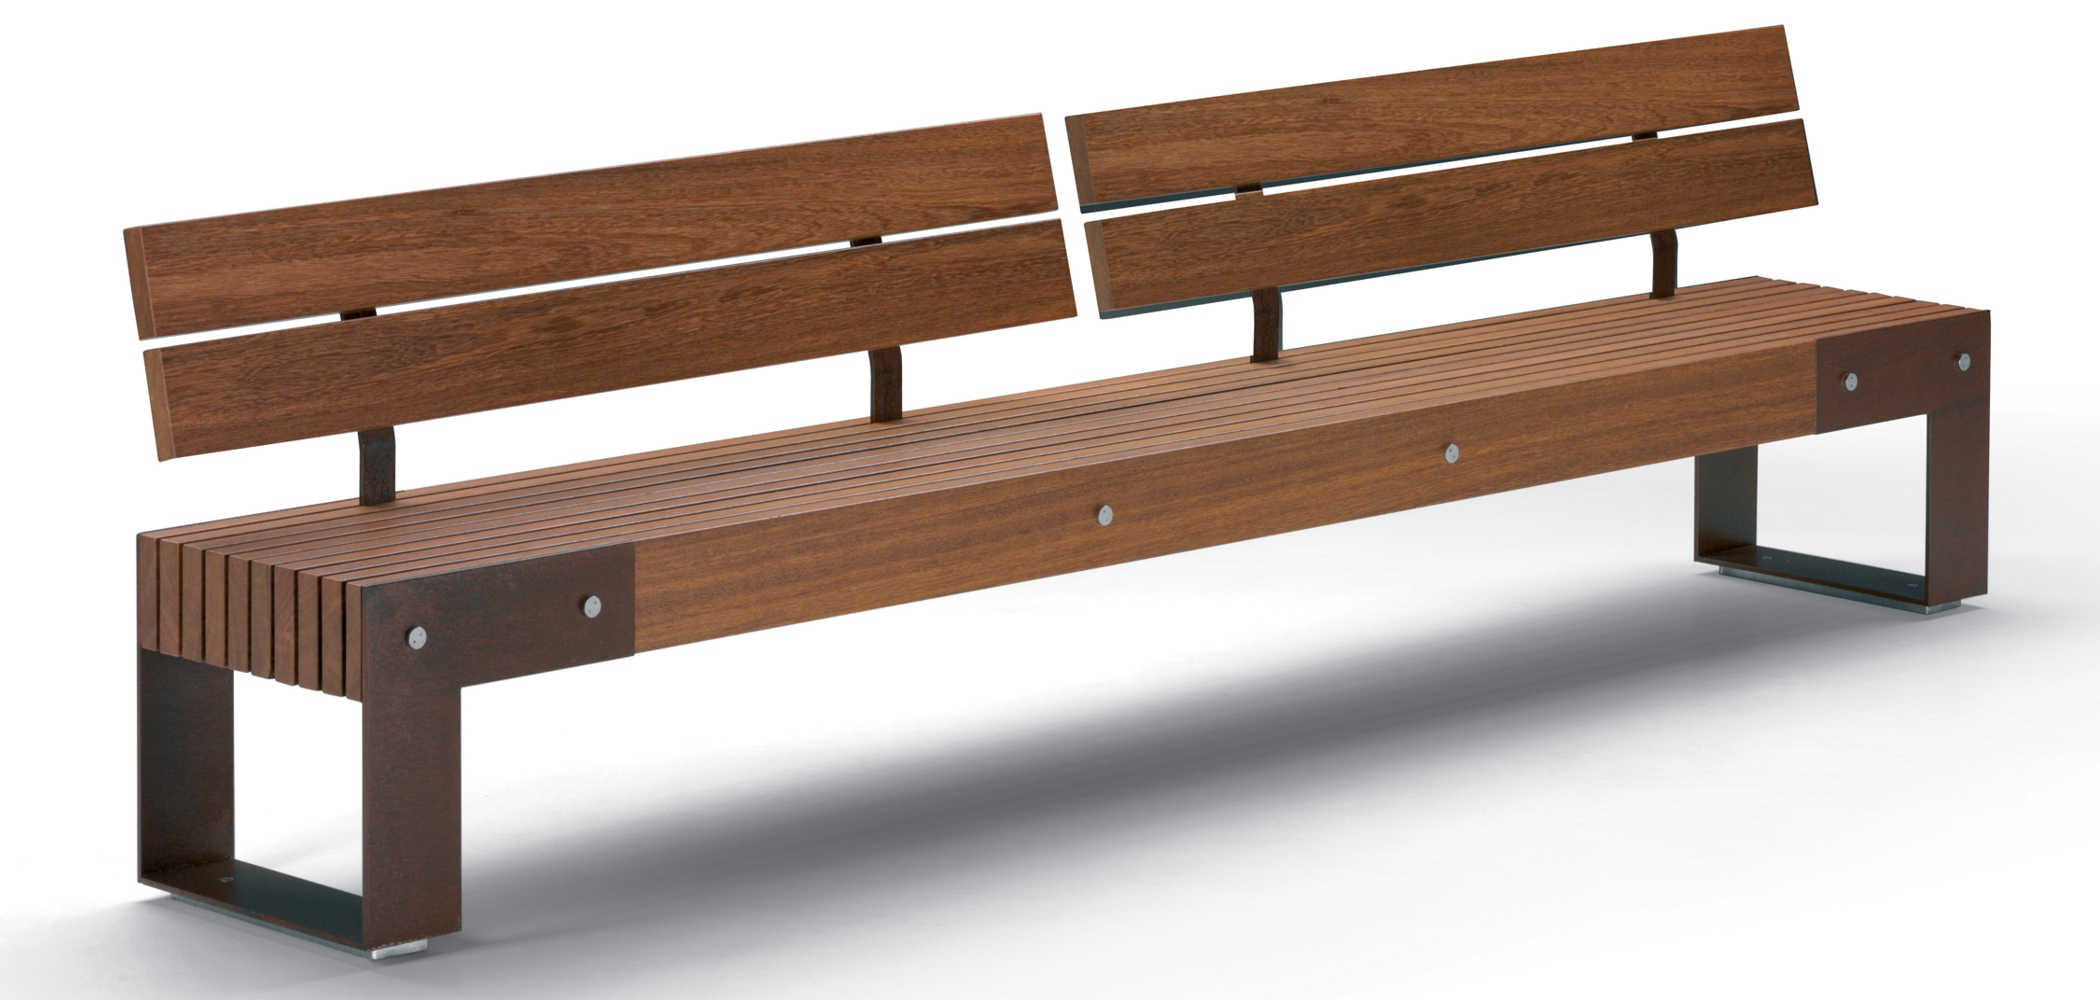 IDEAS L BENCHES